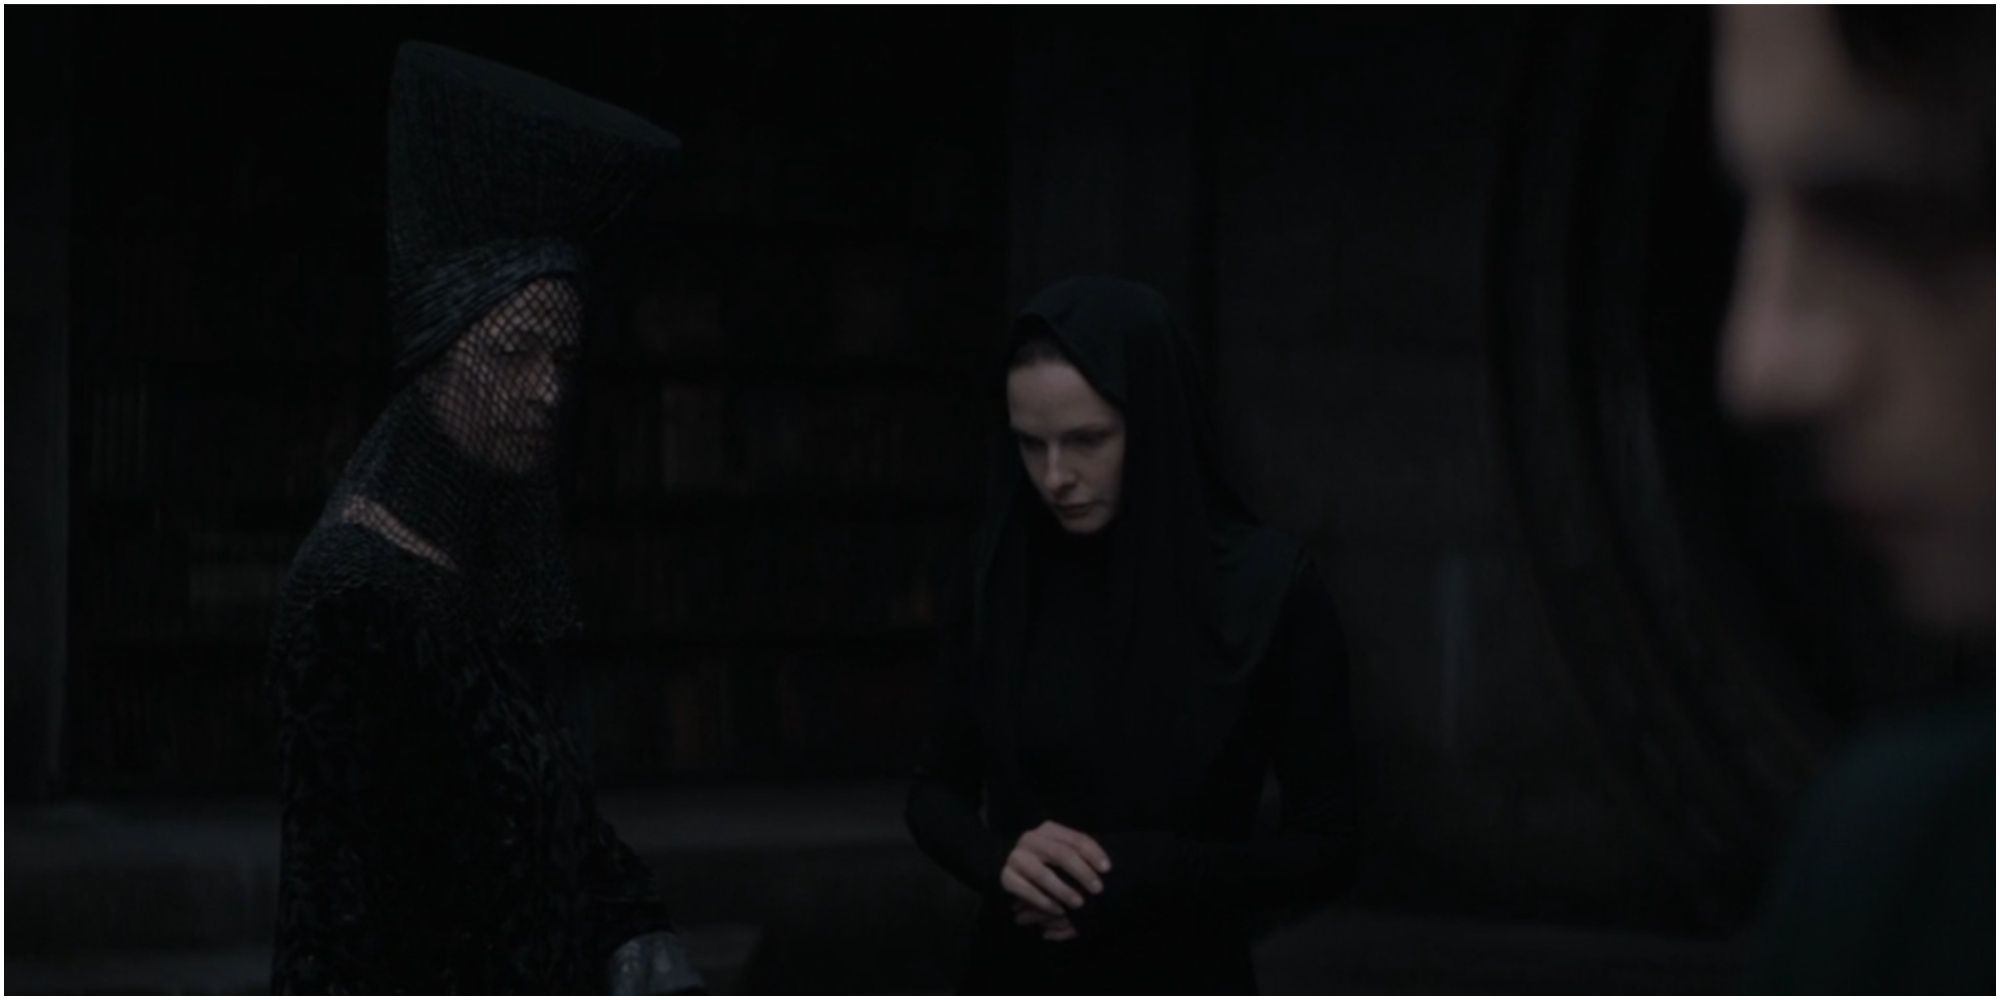 The Reverend Mother Jessica and Paul Atreides in Dune.